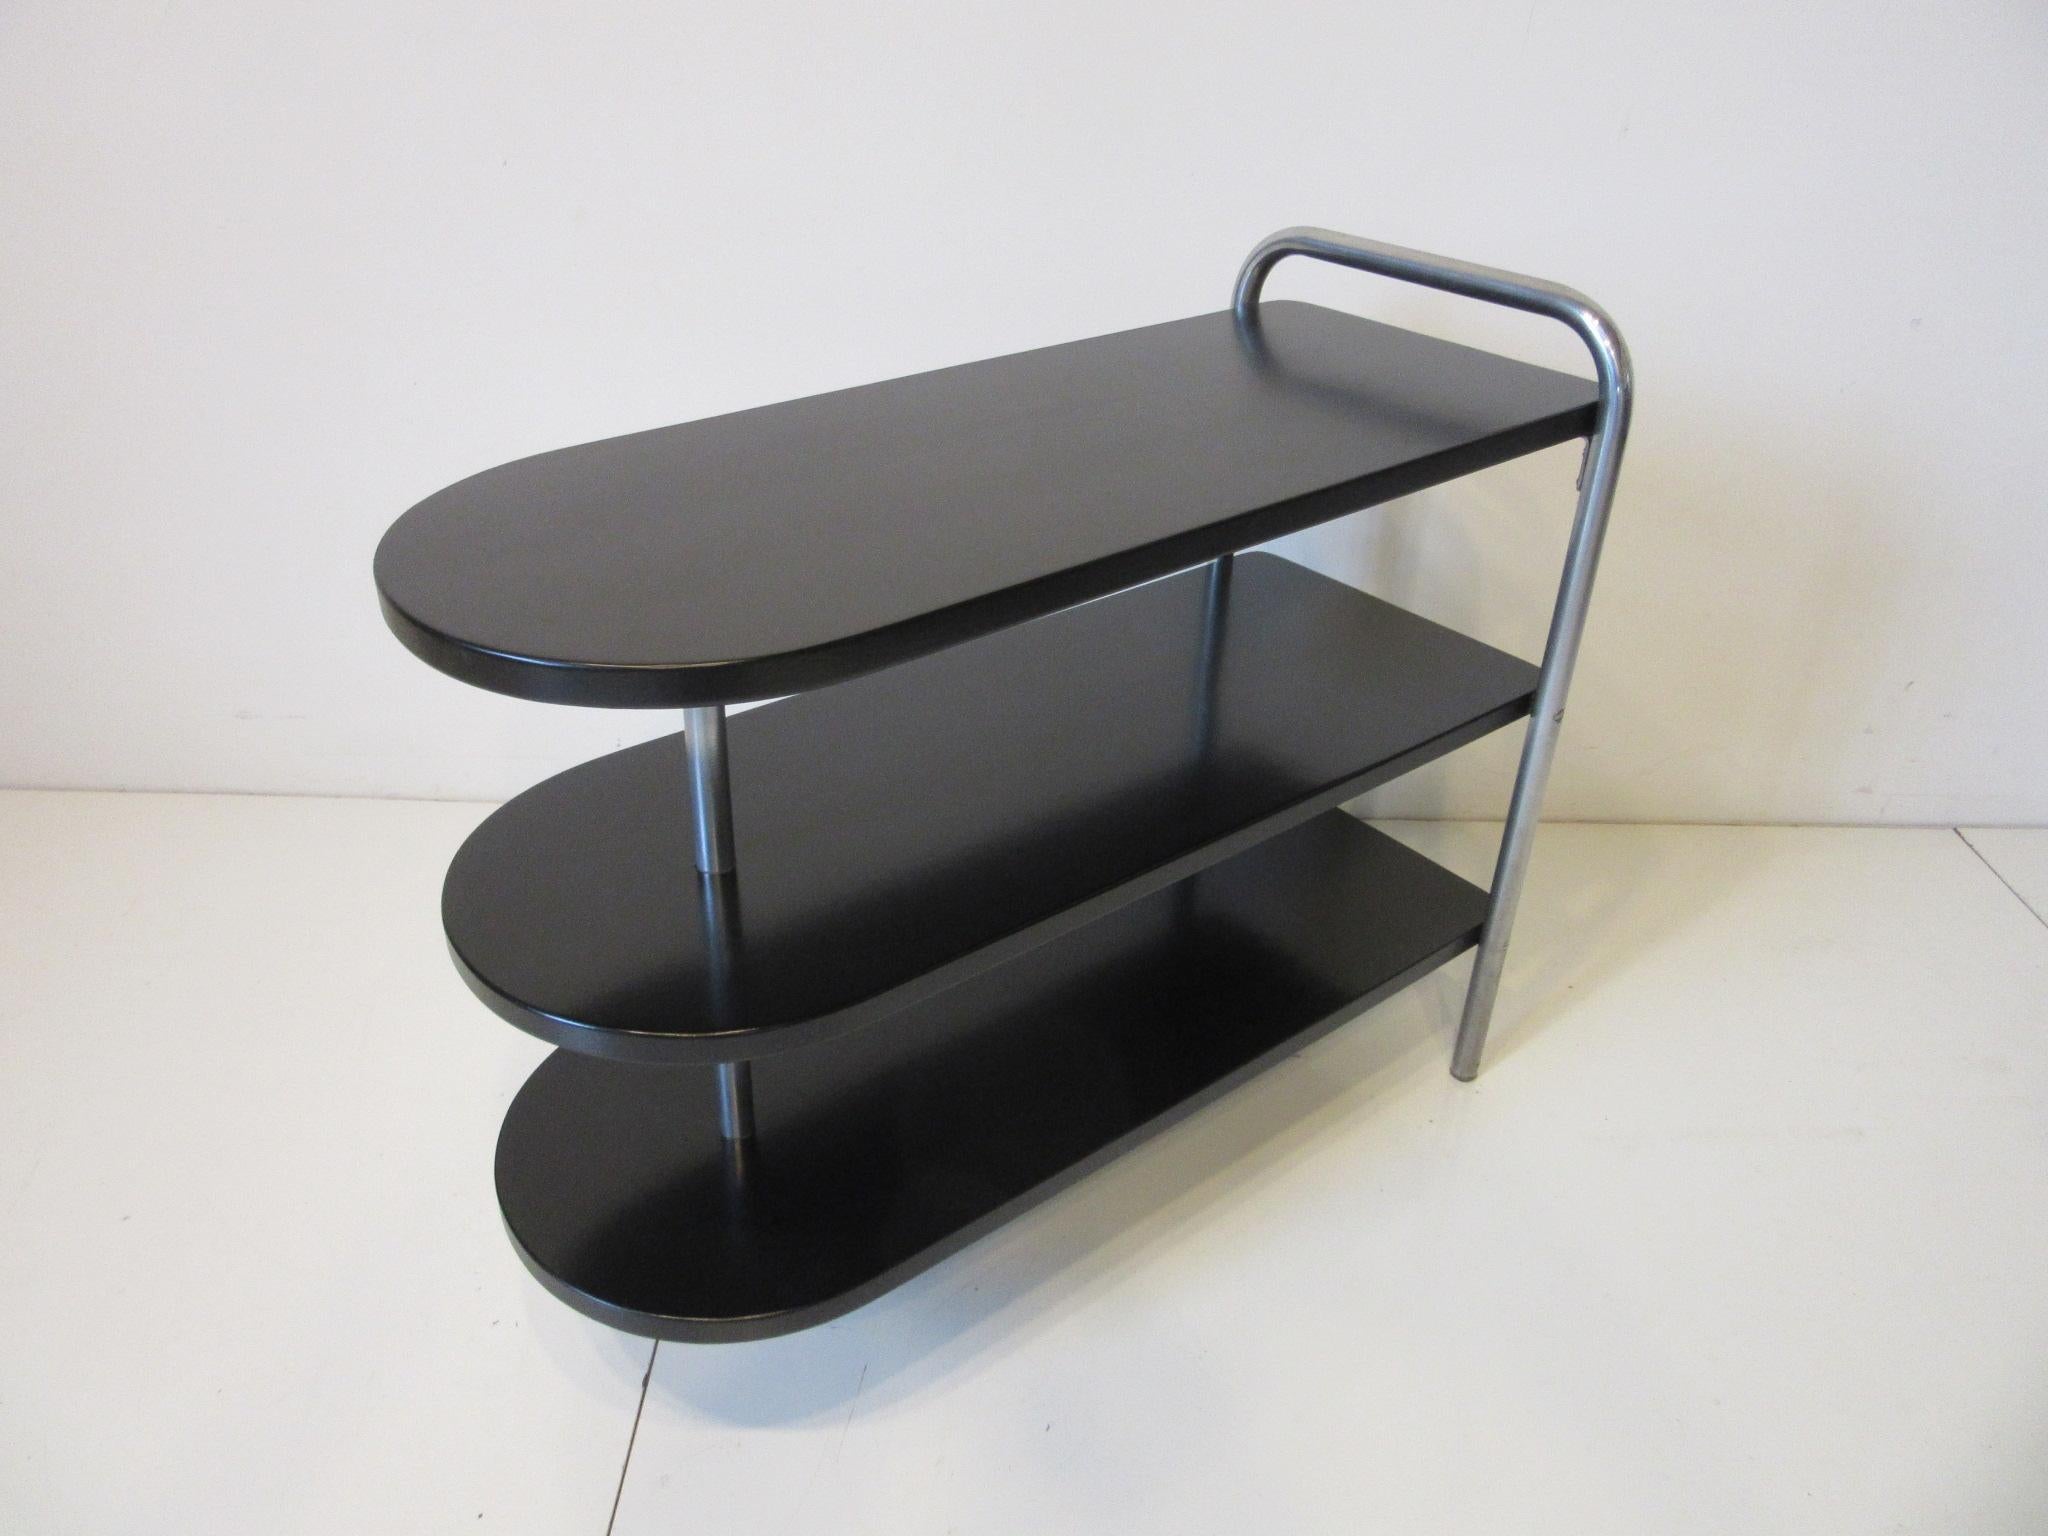 A satin black wood topped tri tiered Machine Age / Art Deco side table with chromed legs and retaining the original label to the bottom. Manufactured by the Howell Modern Metal Furniture Company.